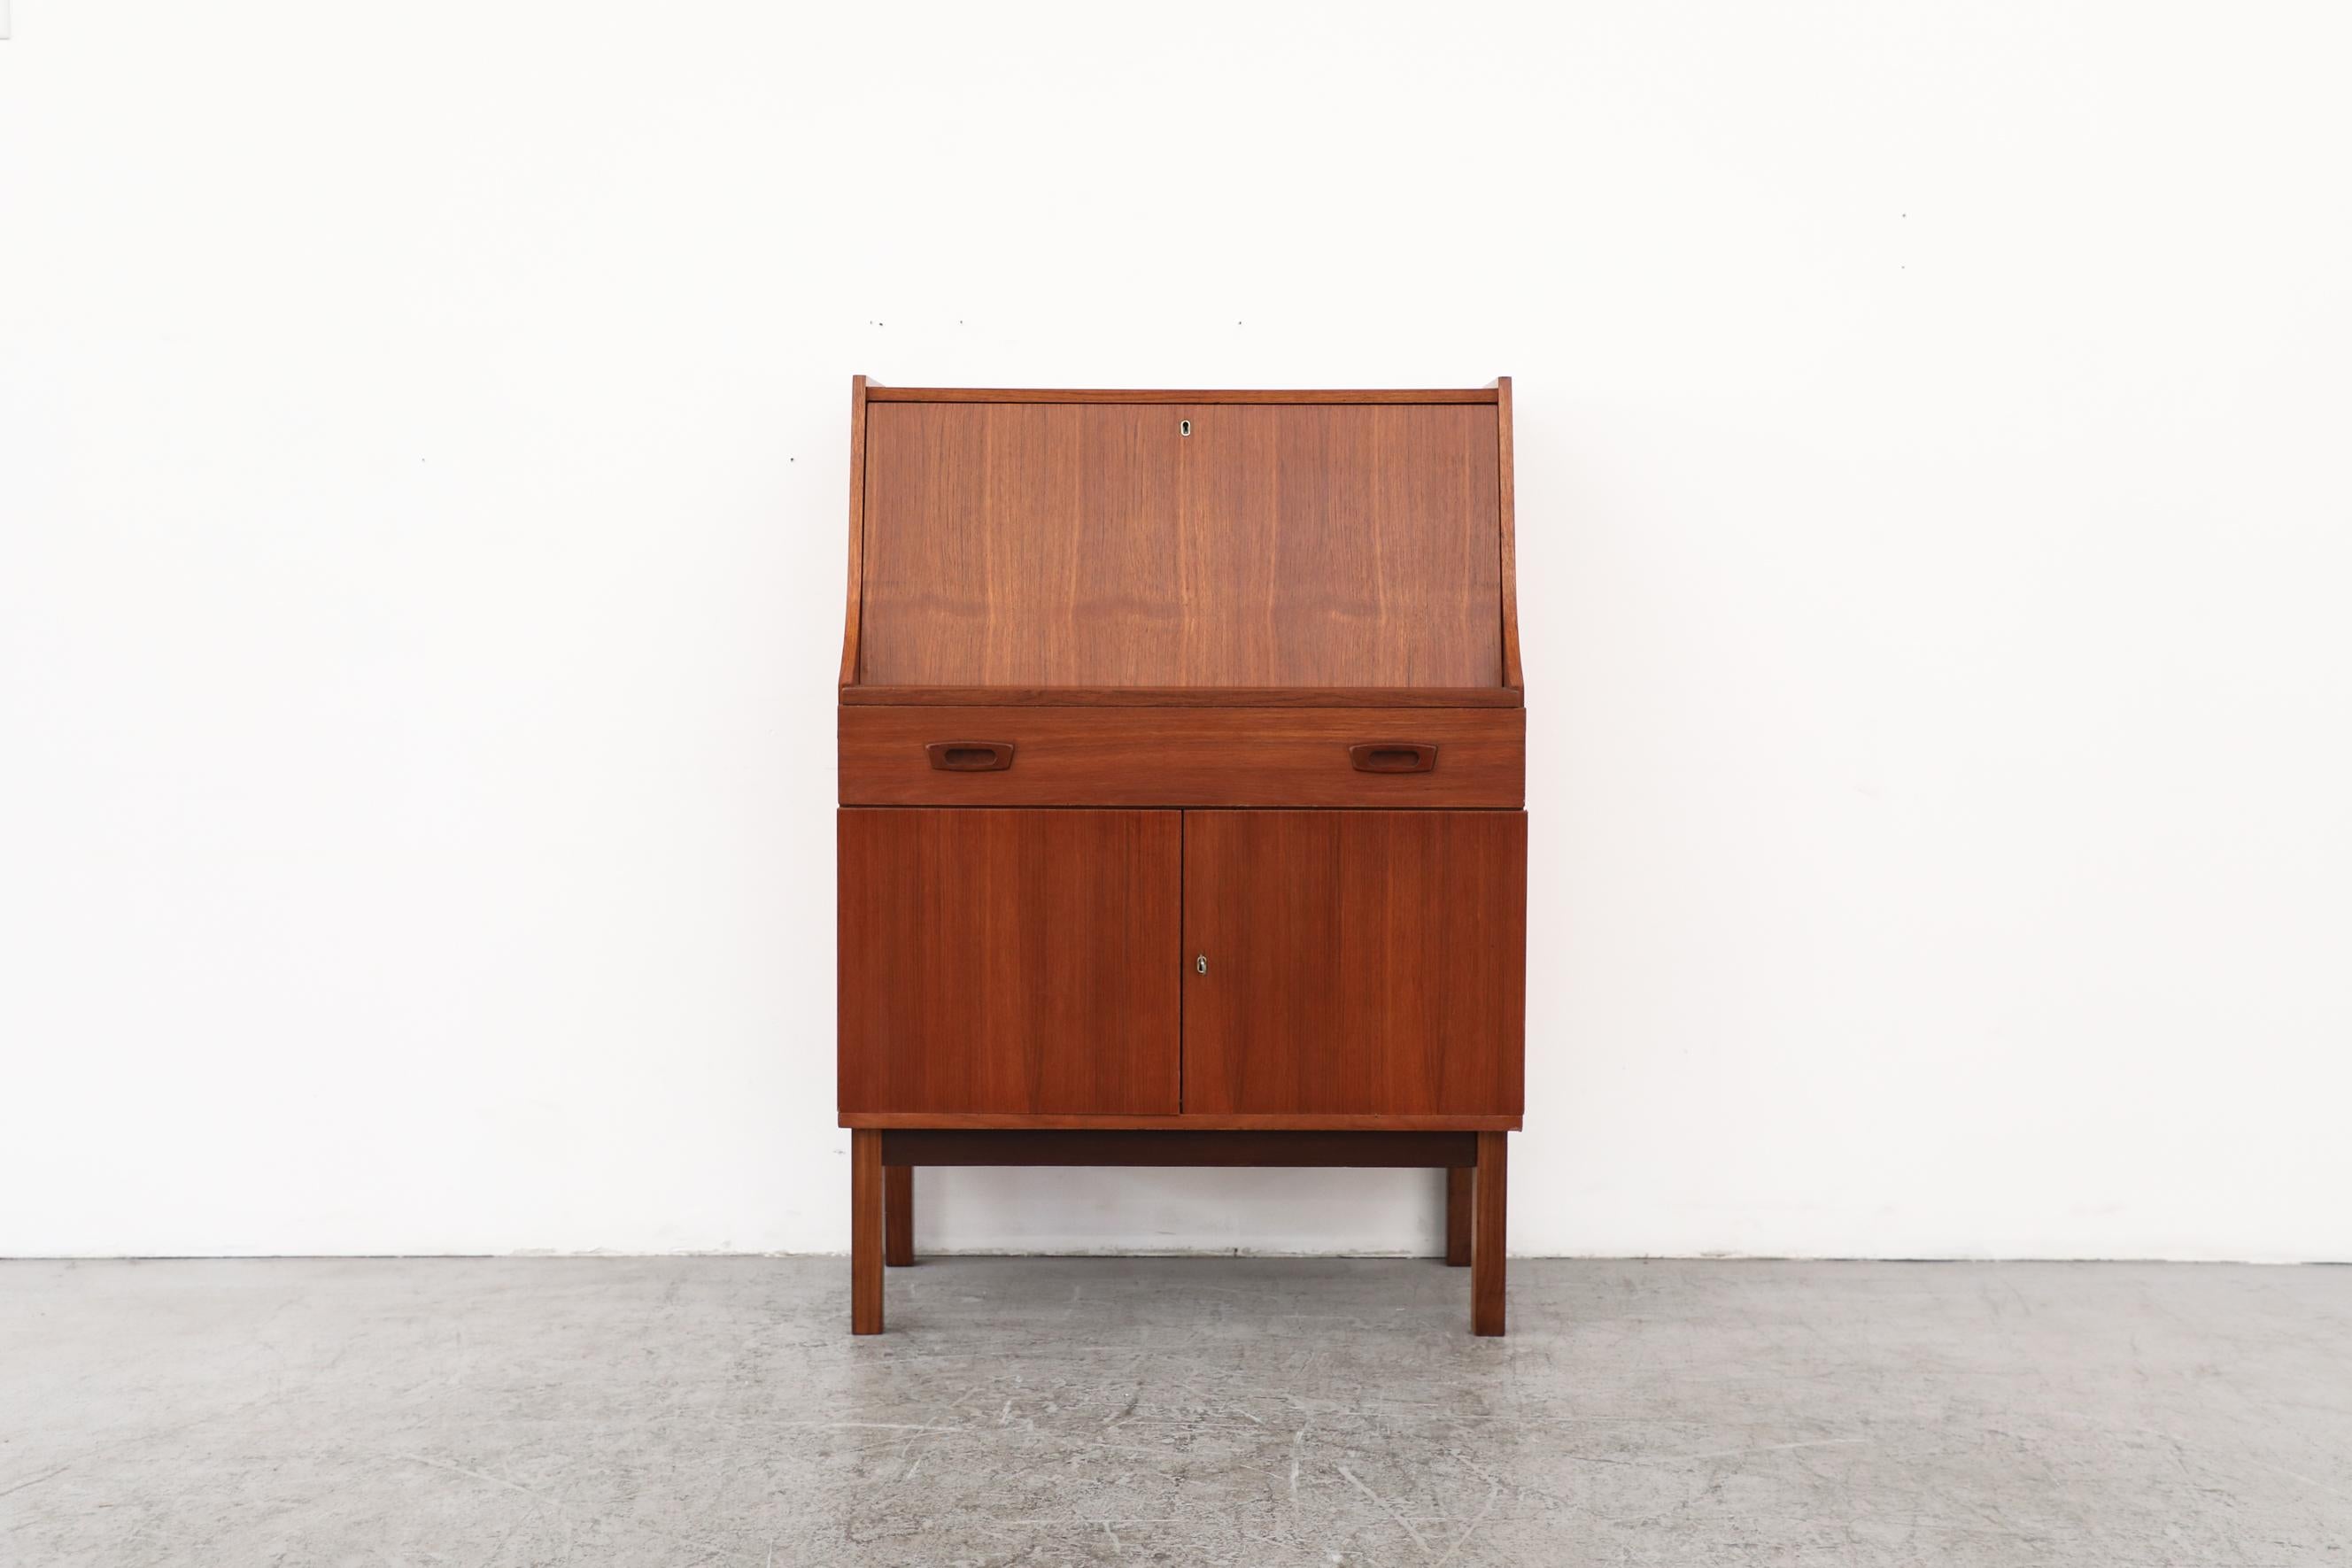 Mid-century Danish teak secretary desk or vanity with organizer cubbies and shelf inside, a long drawer over a lower locking cabinet. In original condition with visible wear consistent with its age and use. Top lock does not function.